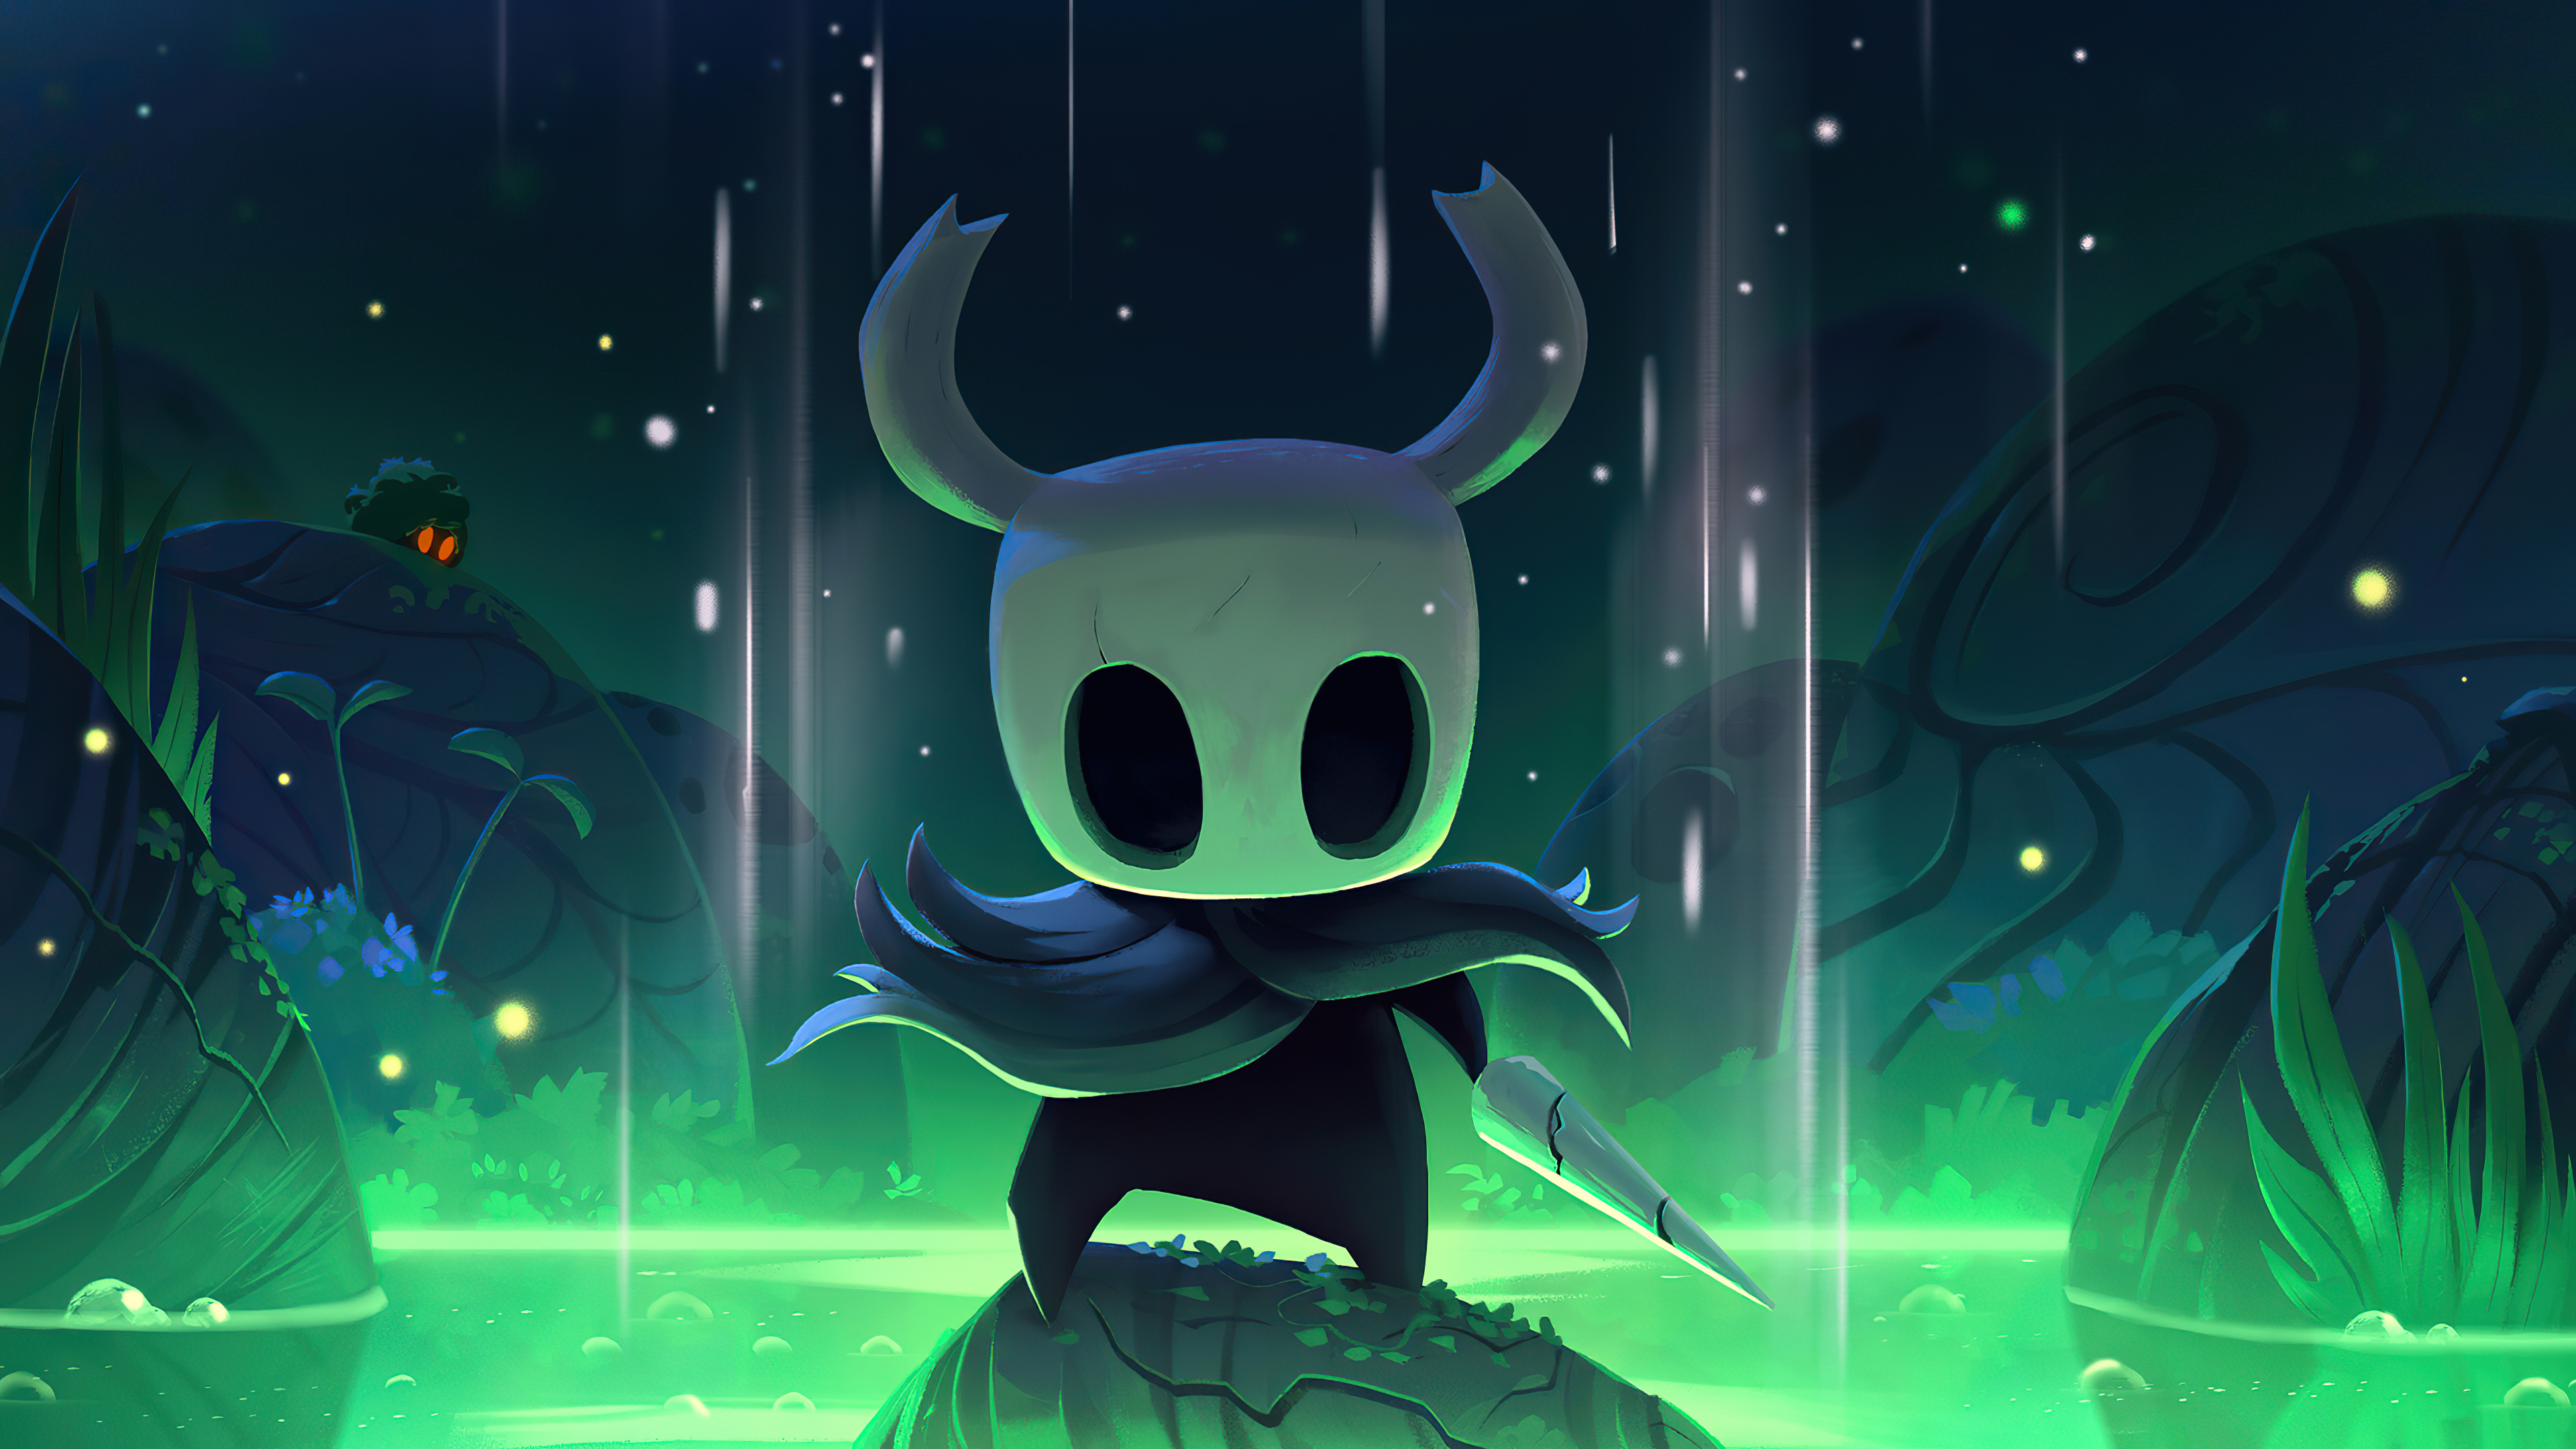 hollow knight soundtrack download